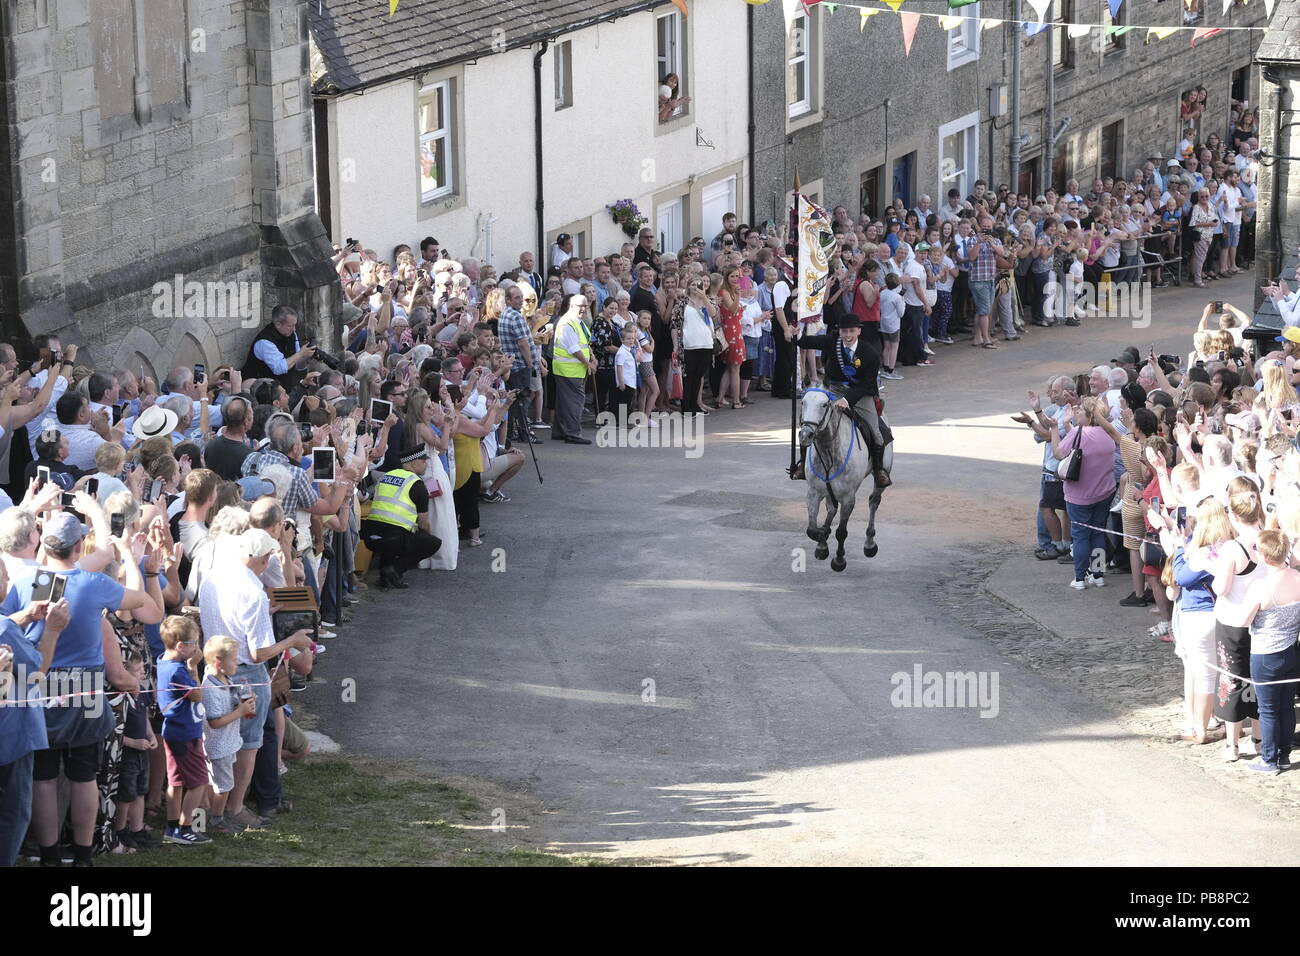 Langholm, Scotland, UK. 27th July, 2018.   Langholm Common Riding - 'Langholm's Great Day' Langholm Cornet Iain Little gallops up the Kirk Wynd ahead of his mounted supporters in Langholm, 'The Muckle Toon' has seen tradition upheld for over 250 years with the Annual Langholm Common Riding which takes place every year on the last Friday in July, This year falling on Friday 27th.    Credit: Rob Gray/Alamy Live News Stock Photo